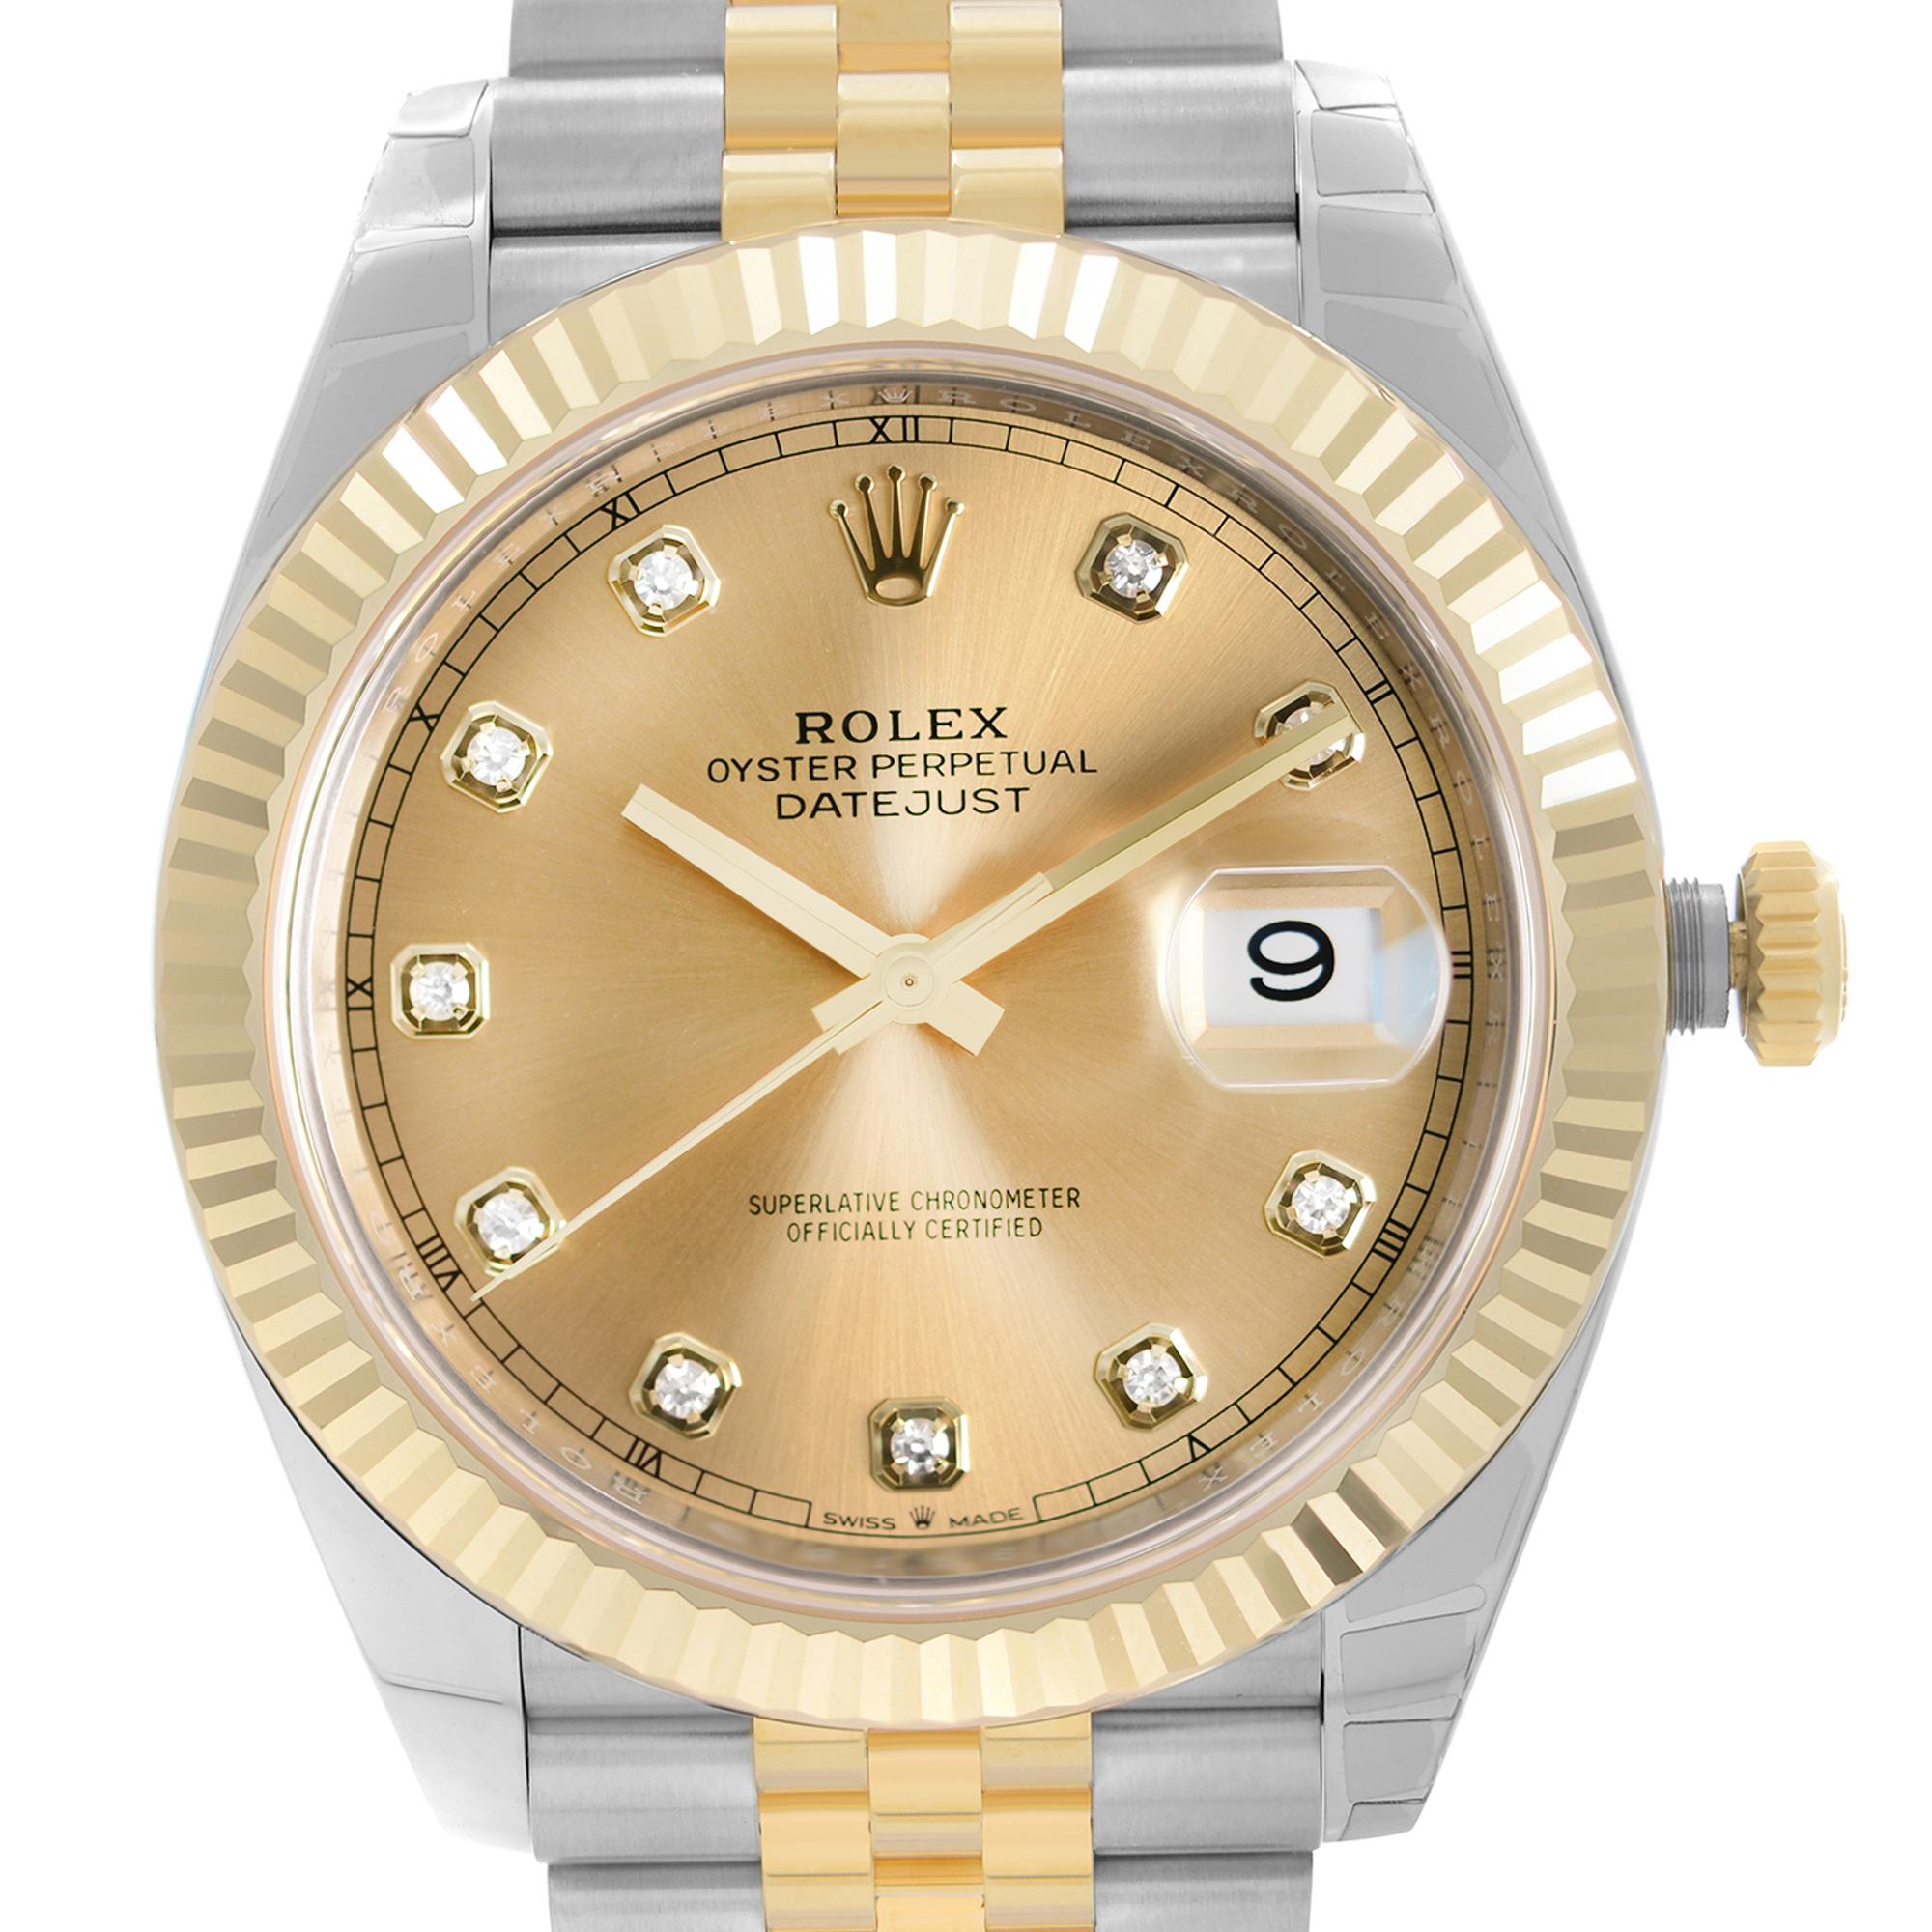 Never Worn 2021 All stickers except Barcode one. Rolex Datejust 41mm 18k Yellow Gold Stainless Steel Champagne Dial Men's Automatic Watch 126333. The Watch comes with a 2021 card. This Timepiece is powered by an Automatic Movement and Features: